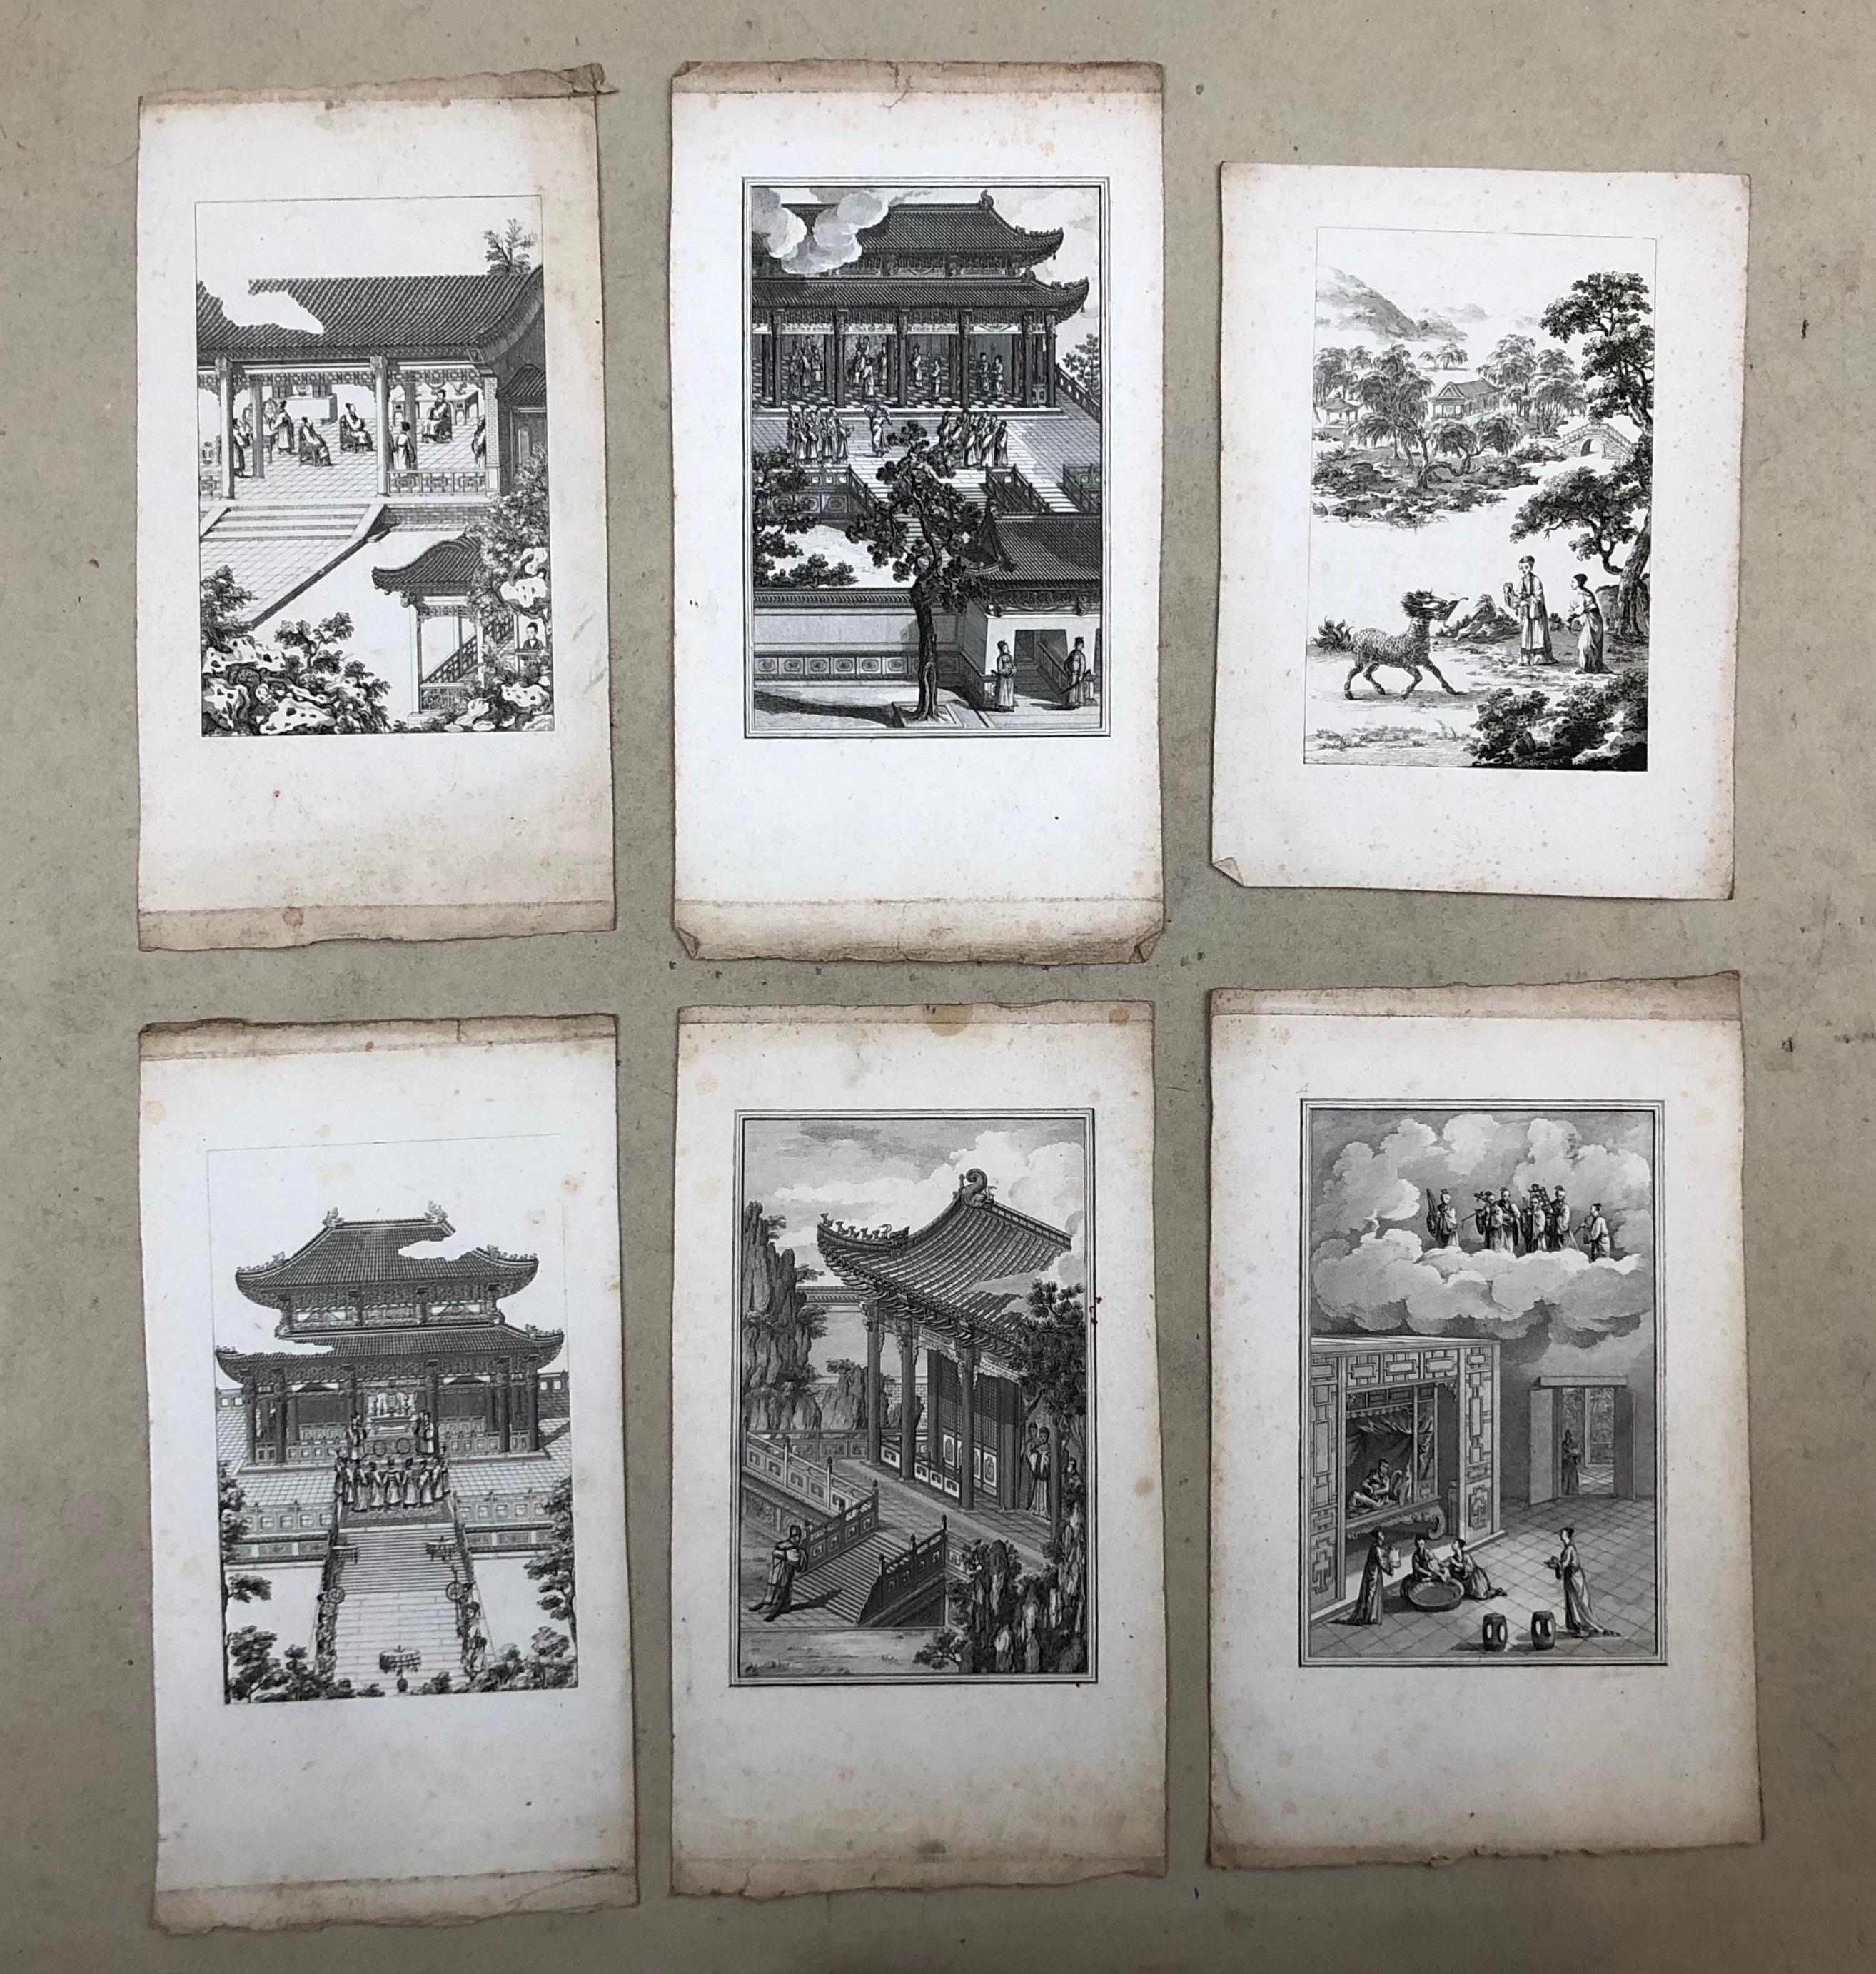 Unknown Landscape Print - Scenes From Chinese Life, 6 Engravings Late 18th Century - Early 19th Century